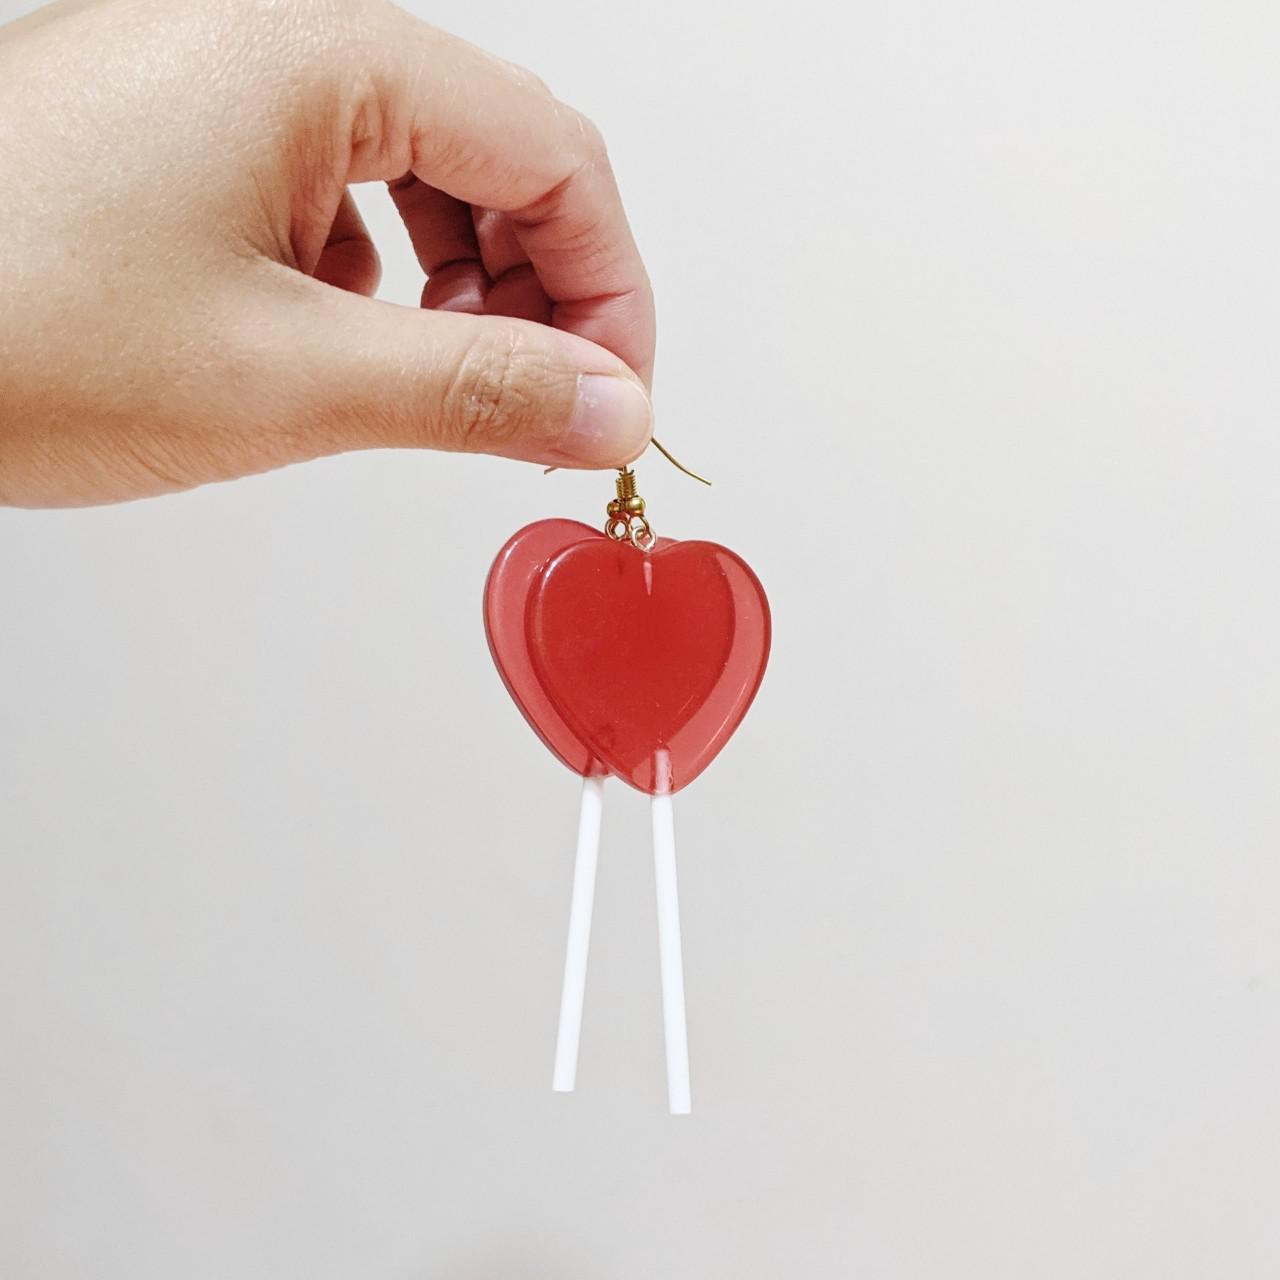 Product Image 2 - (On hold)

❤️ Red heart lollipop